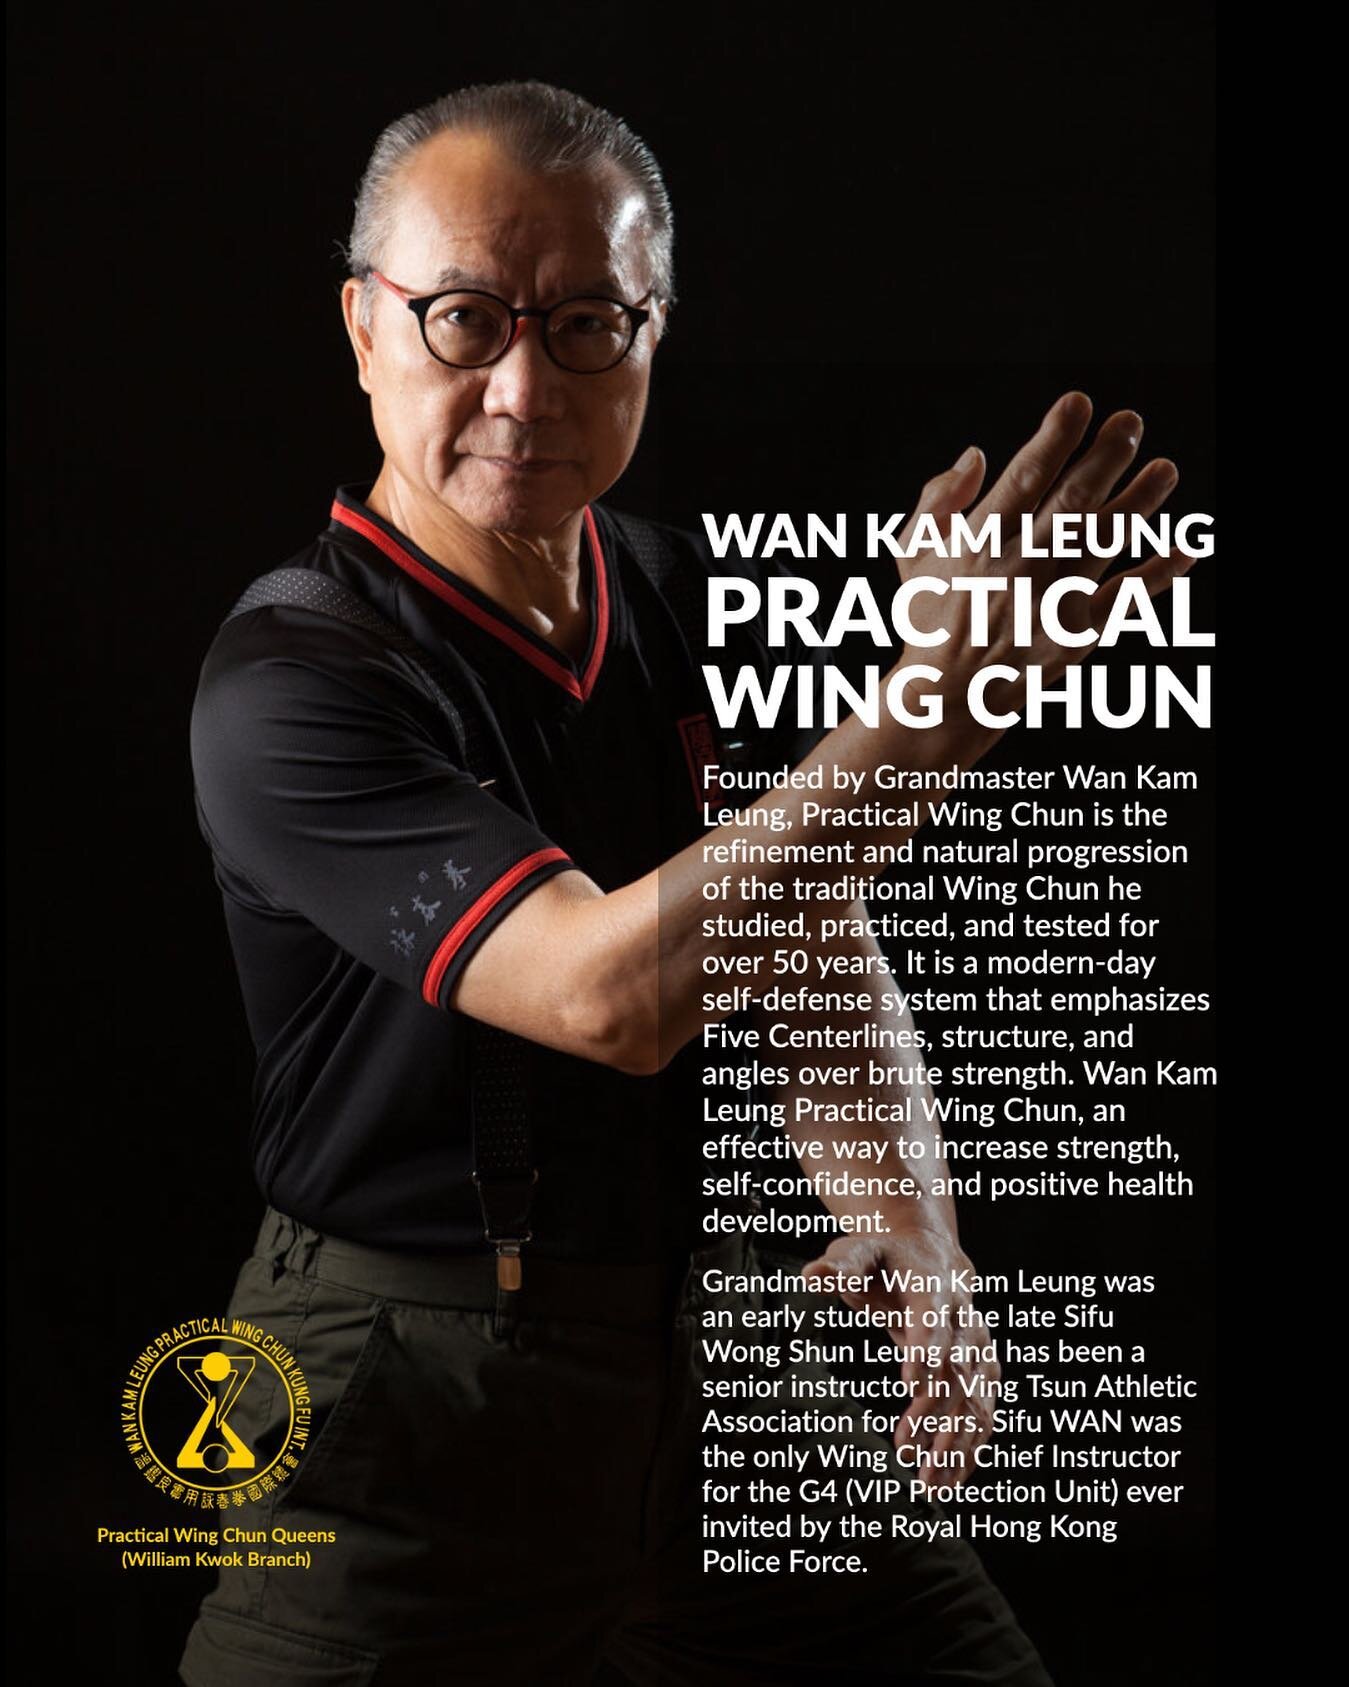 Grandmaster Wan Kam Leung 温鑑良 developed the PWC system with practicality in mind. Following the Wing Chun principles, he relentlessly analyzes and refines his training to maximize its effectiveness. Even now, as a highly-accomplished master, Grandmas